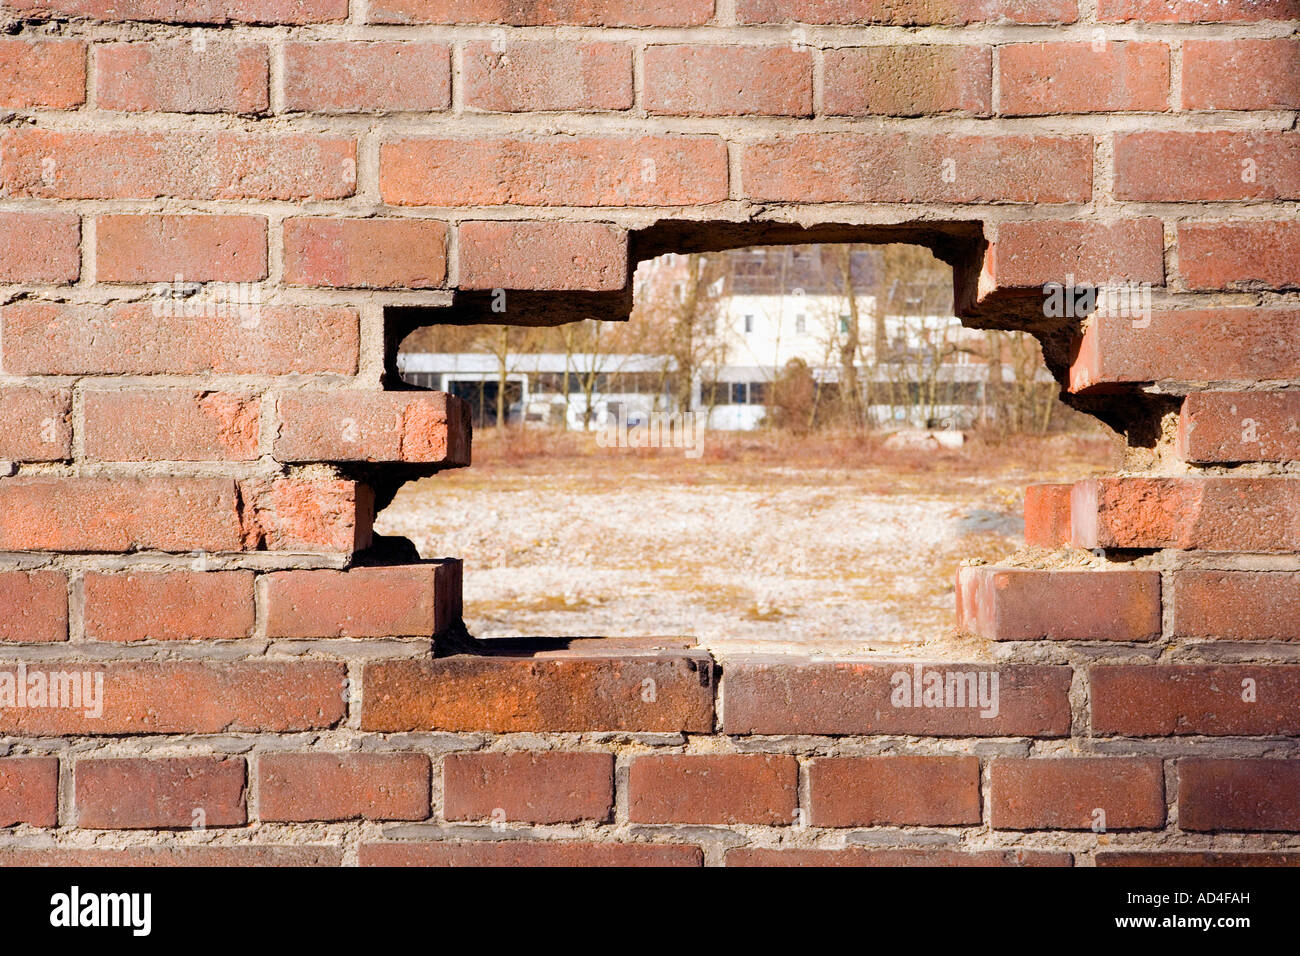 A hole in a brick wall Stock Photo